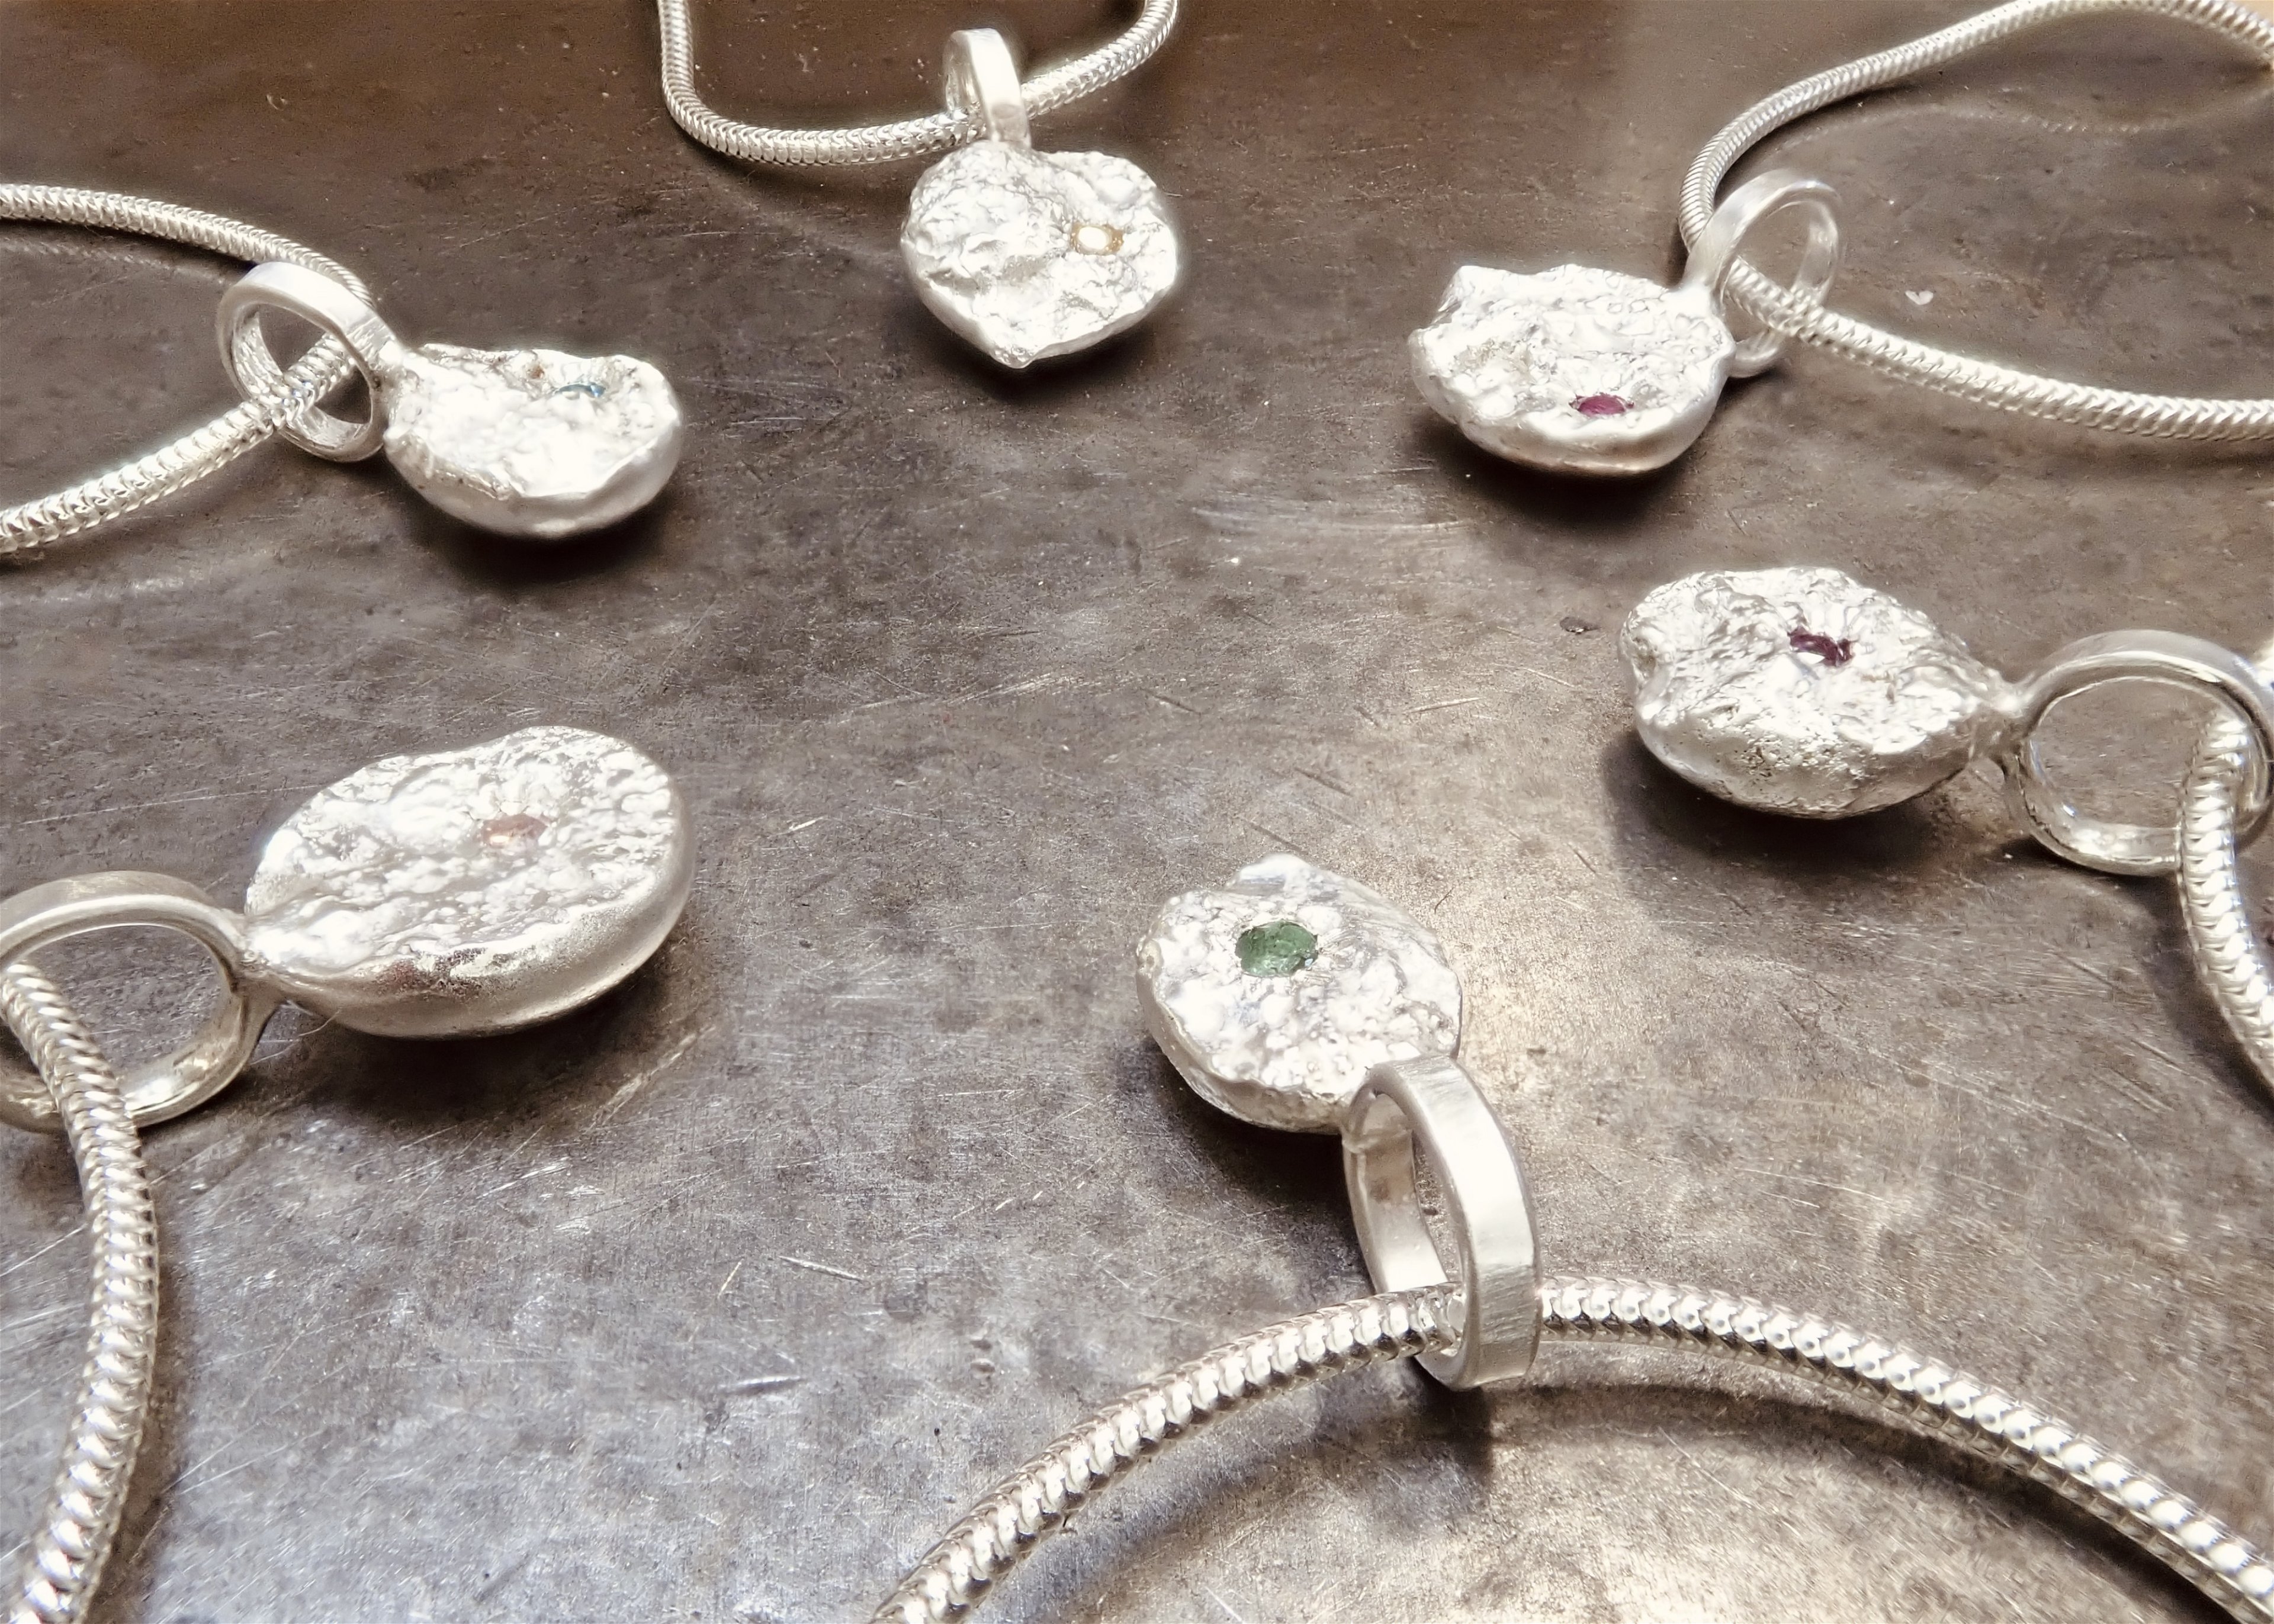 1 hour of Private 1:2:1 Jewellery Making Tuition